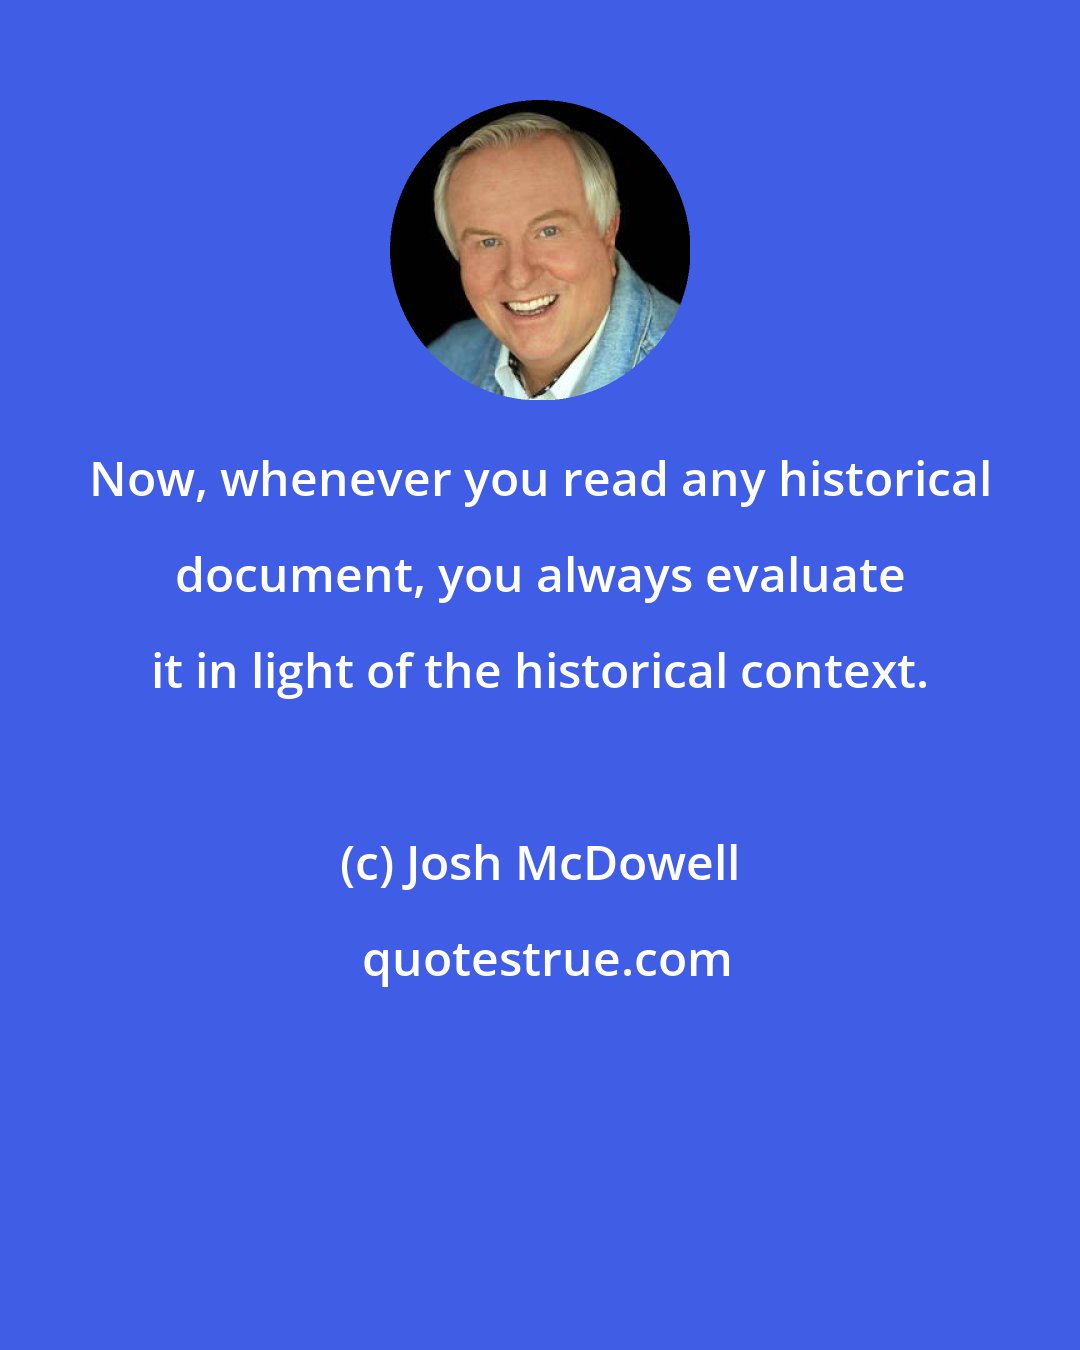 Josh McDowell: Now, whenever you read any historical document, you always evaluate it in light of the historical context.